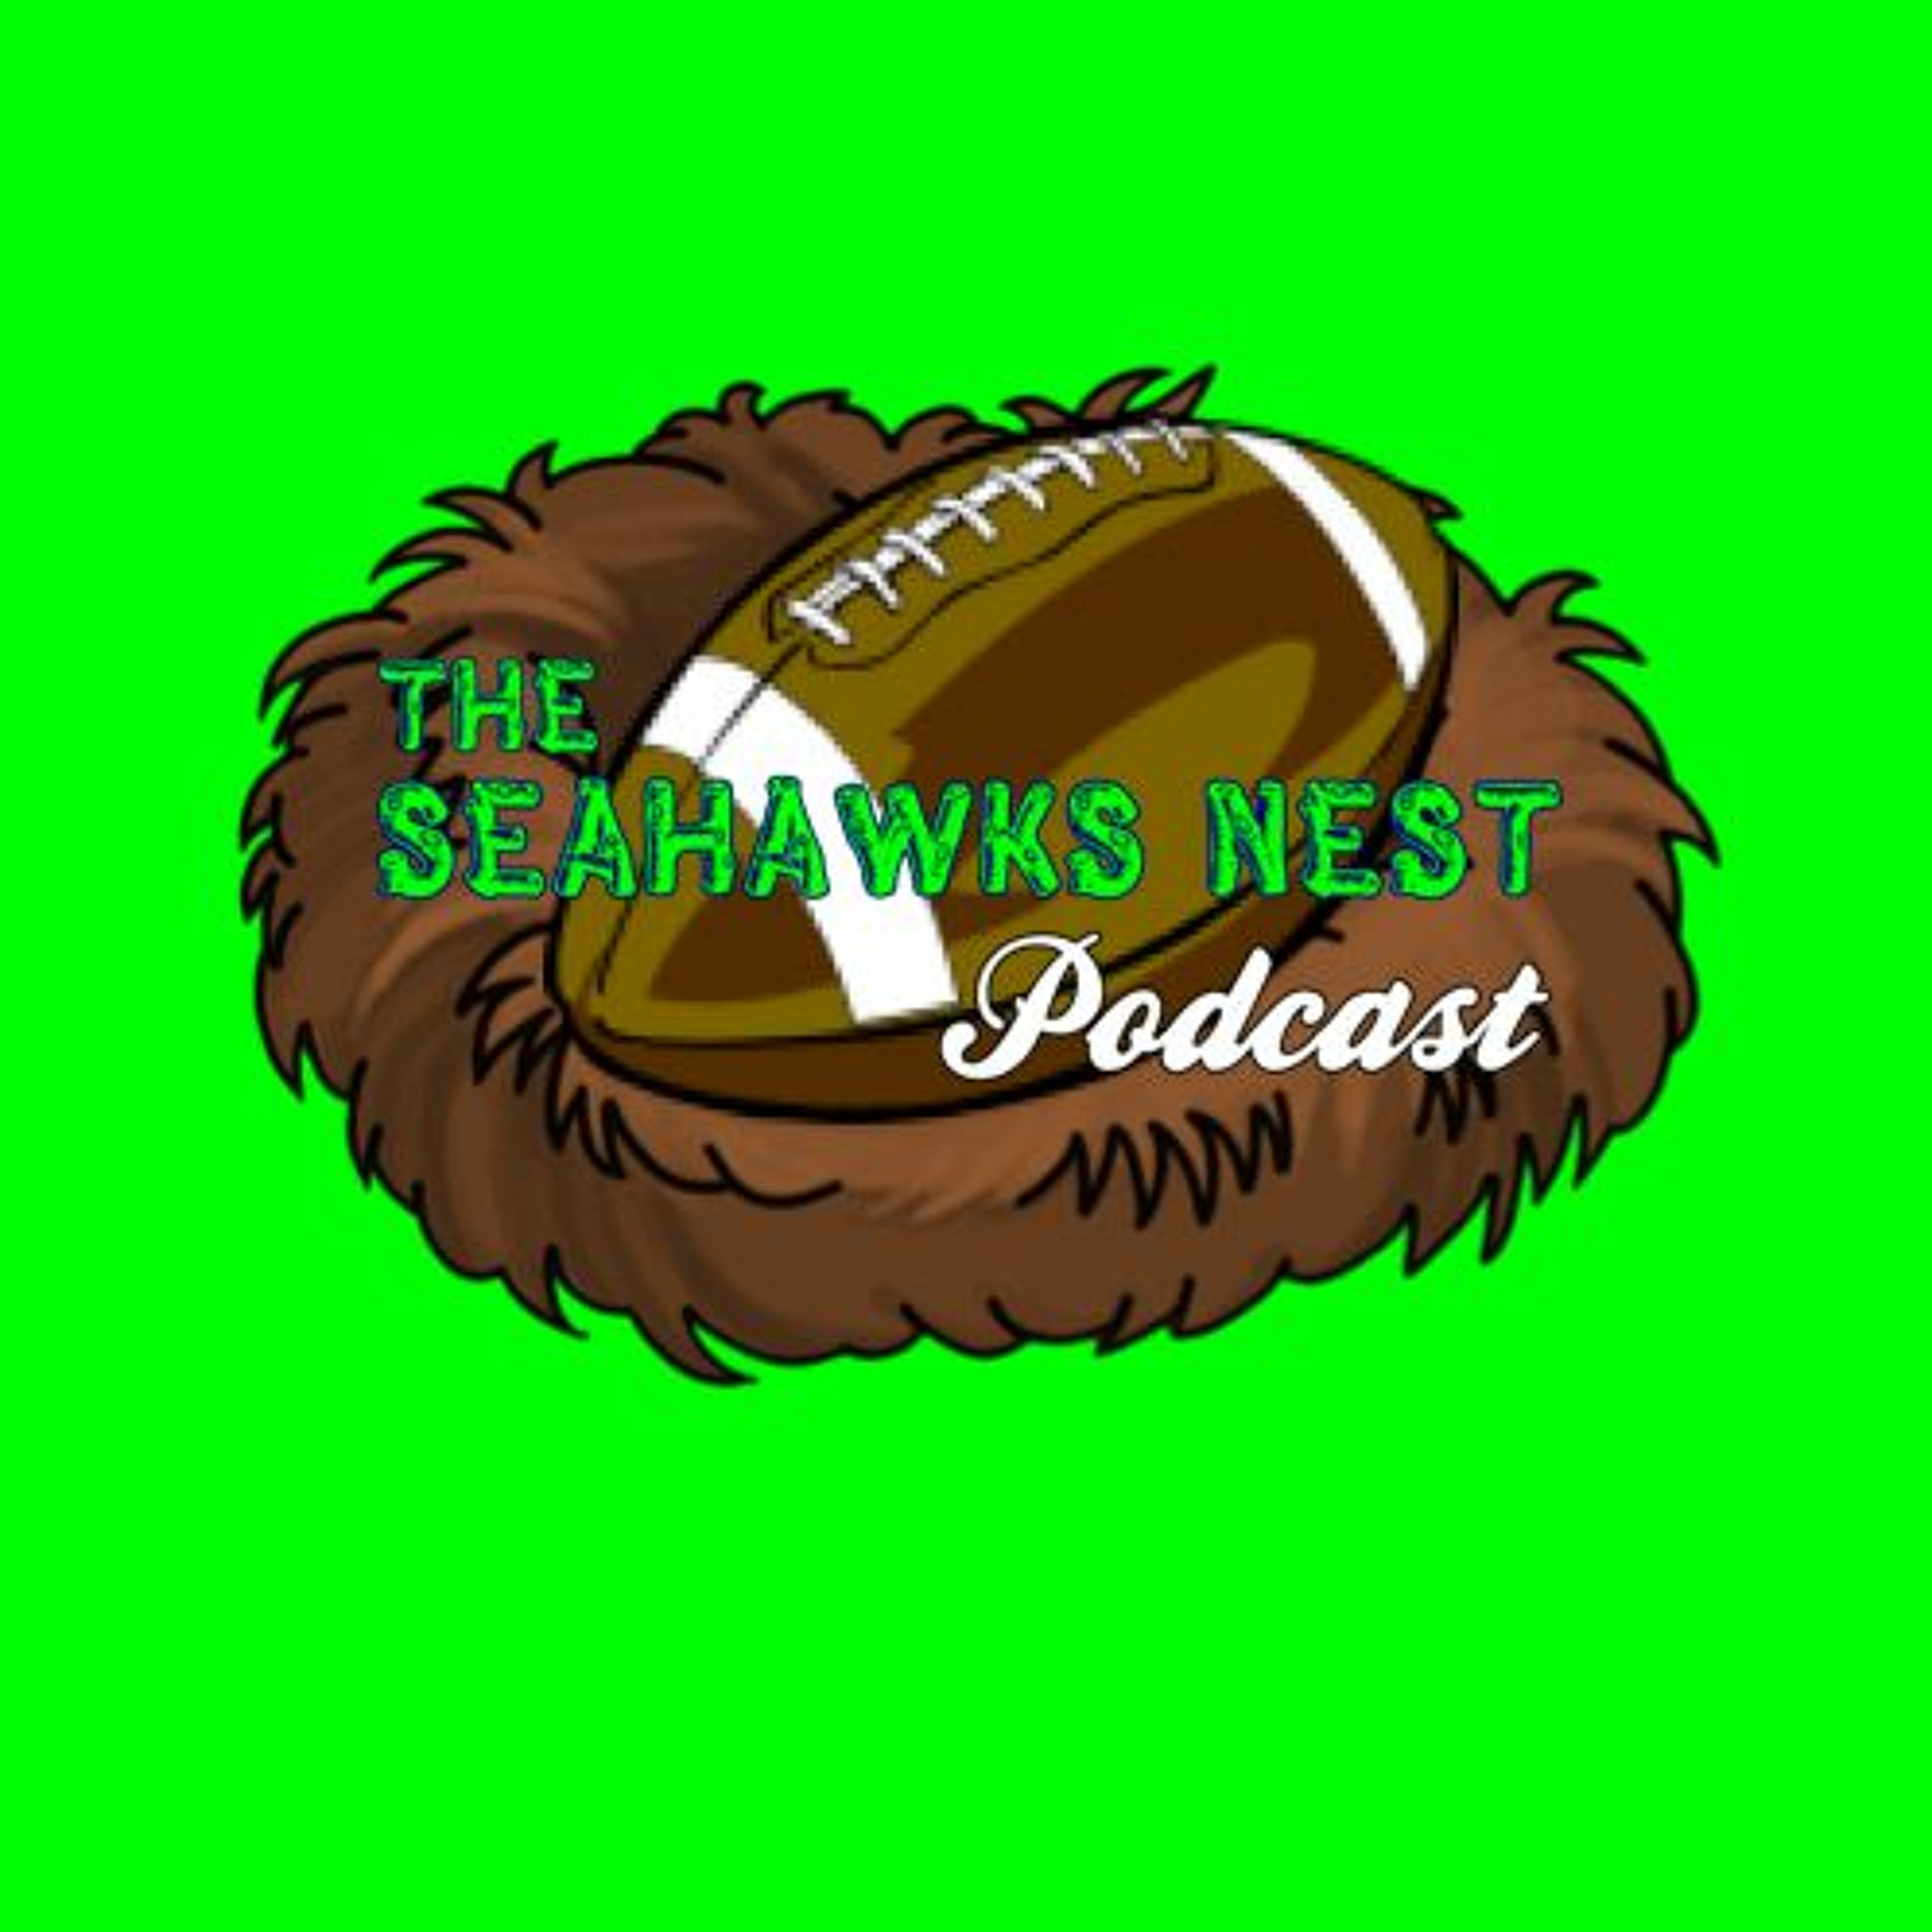 Episode 404 - Seahawks at Giants